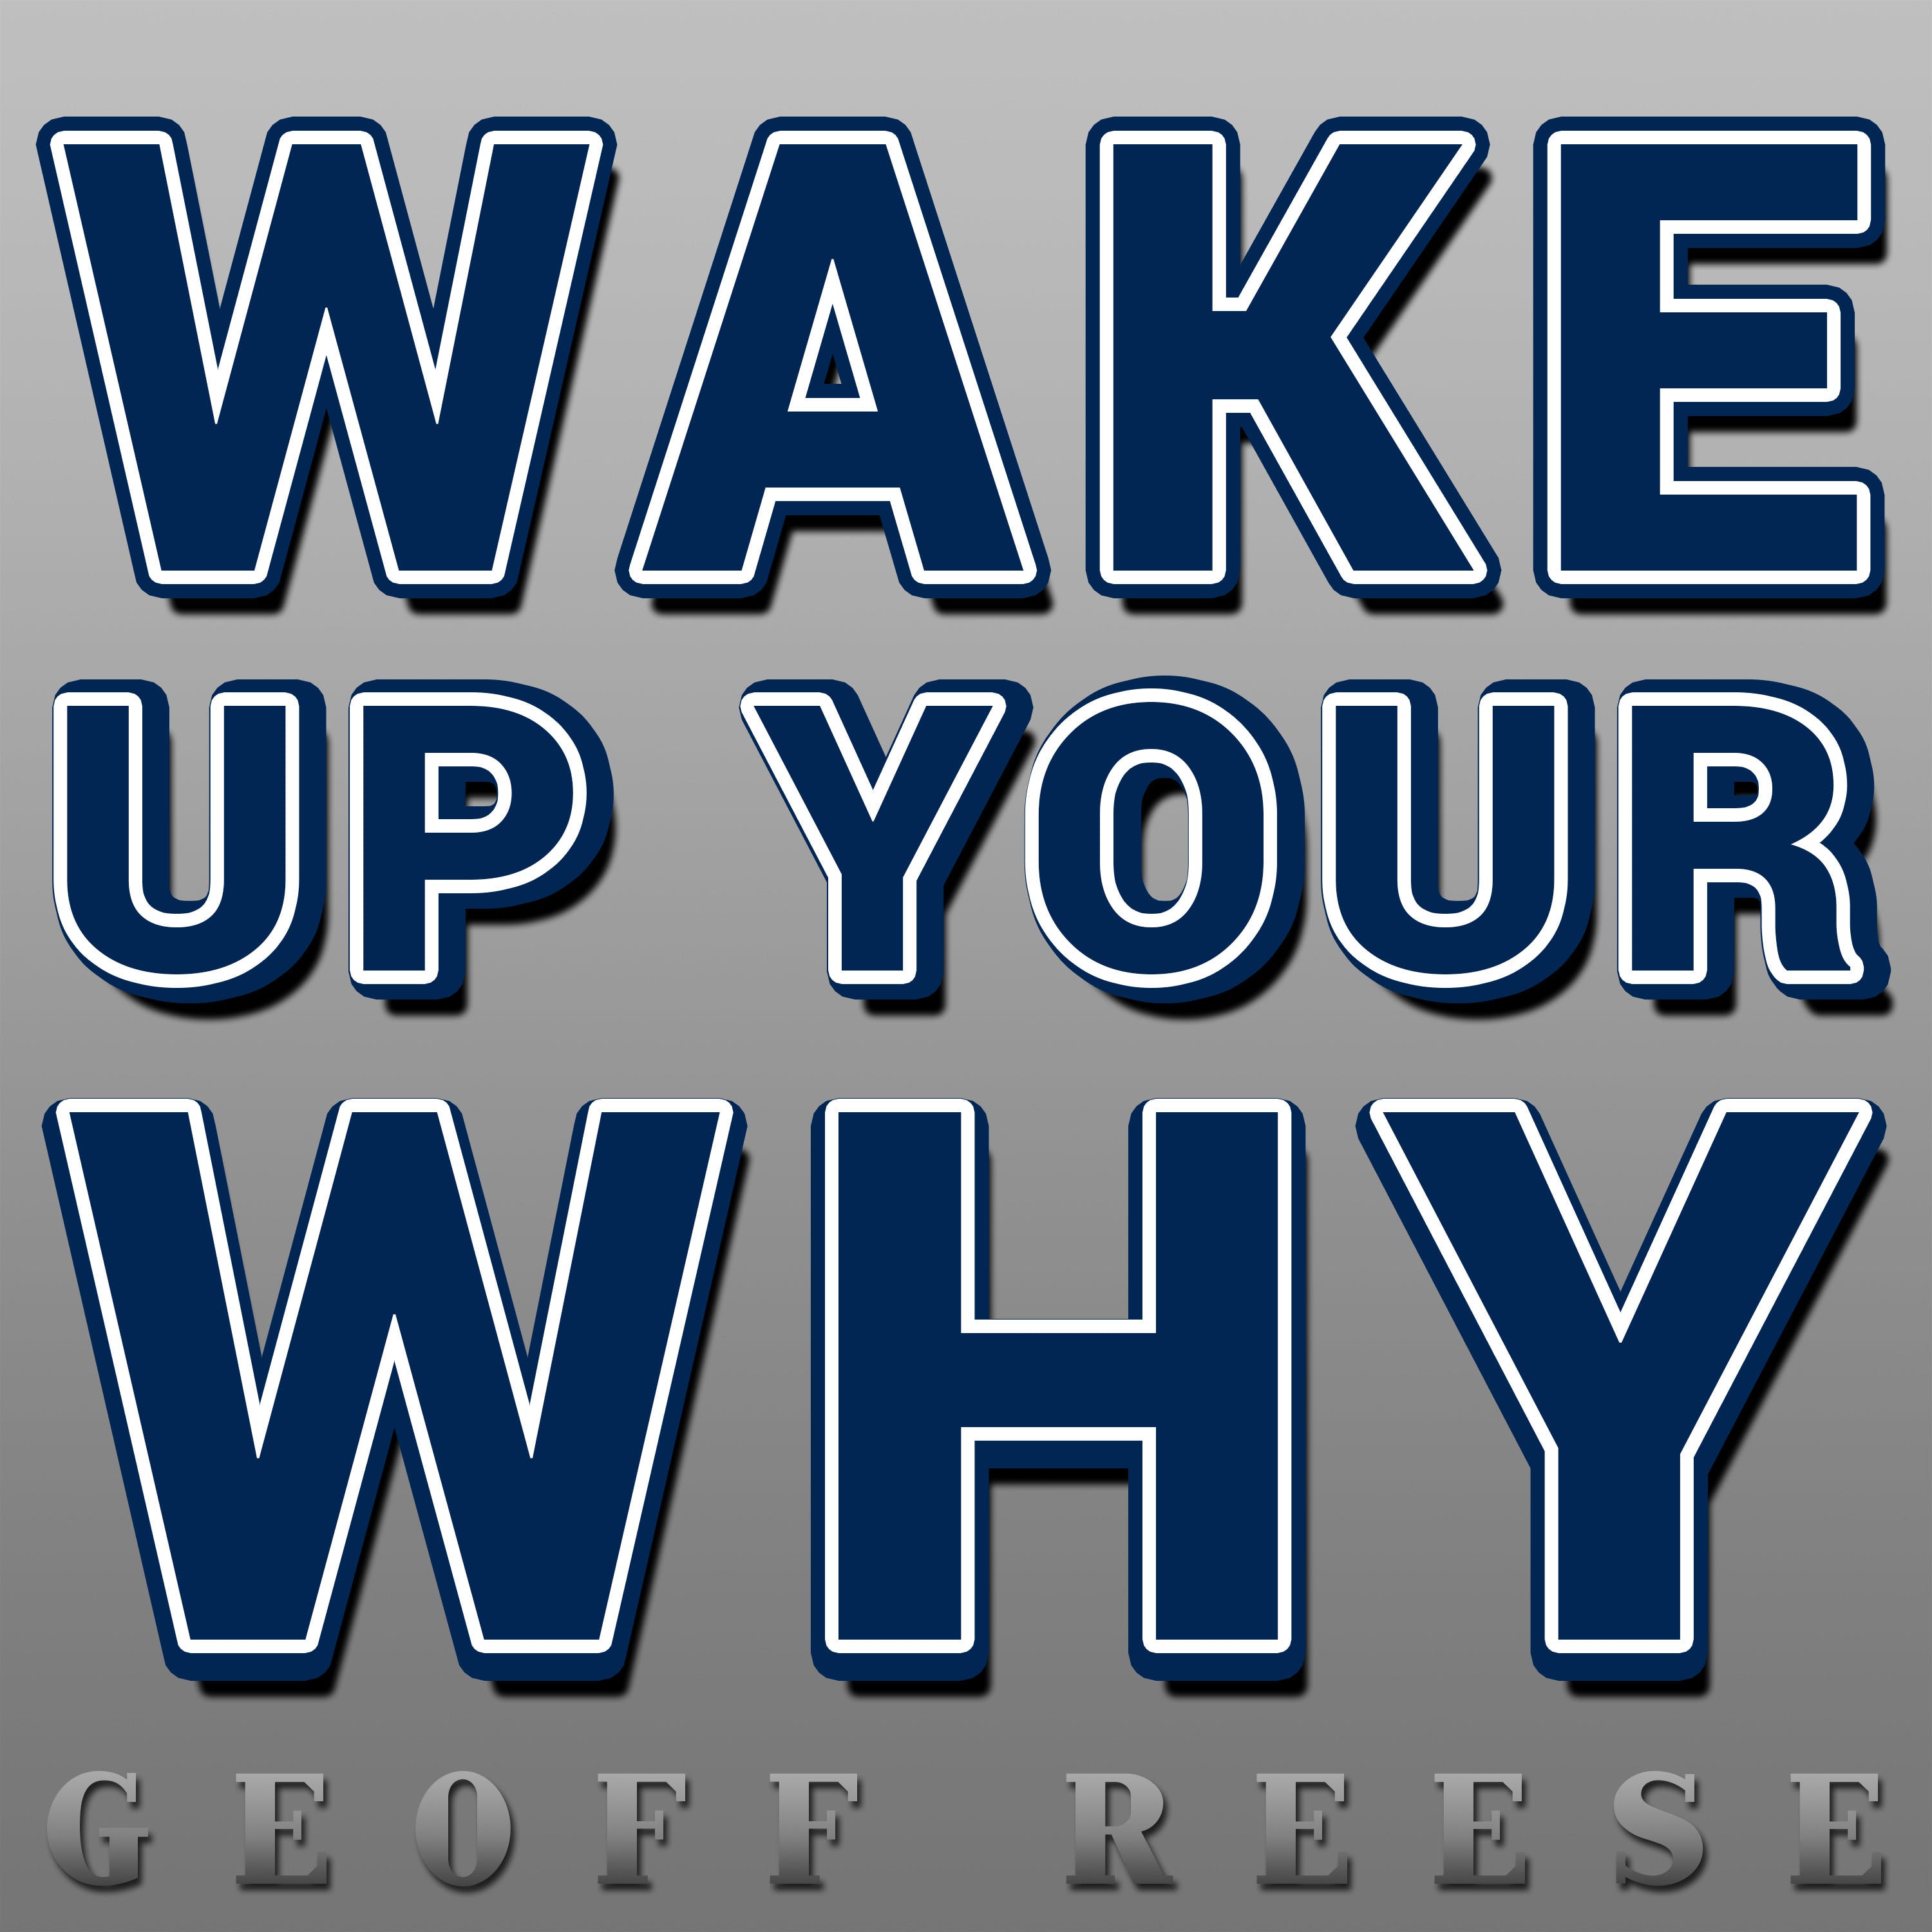 Wake Up Your Why - Chris Brogan On His Secret To Accomplishing More In Your Life media 1